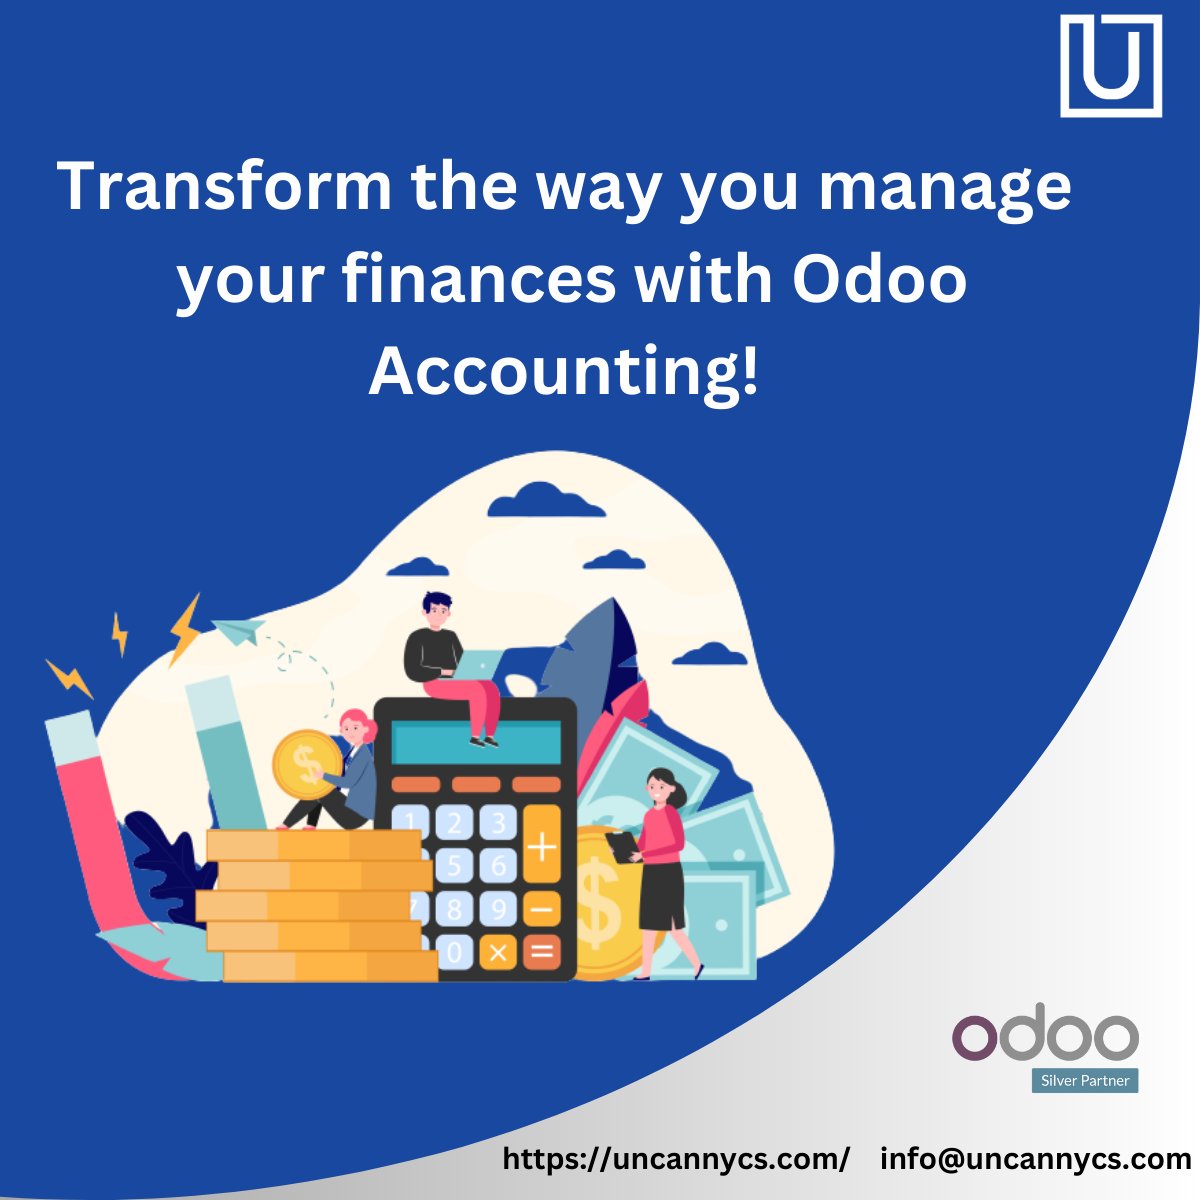 Discover the power of Odoo #Accounting  your ultimate financial companion. Manage, track, and grow your #business with ease! 💪📊
rb.gy/ajlpw
#FinancialCompanion #GrowWithOdoo #SimplifiedFinance #erp #Software #bookkeeping #Finance